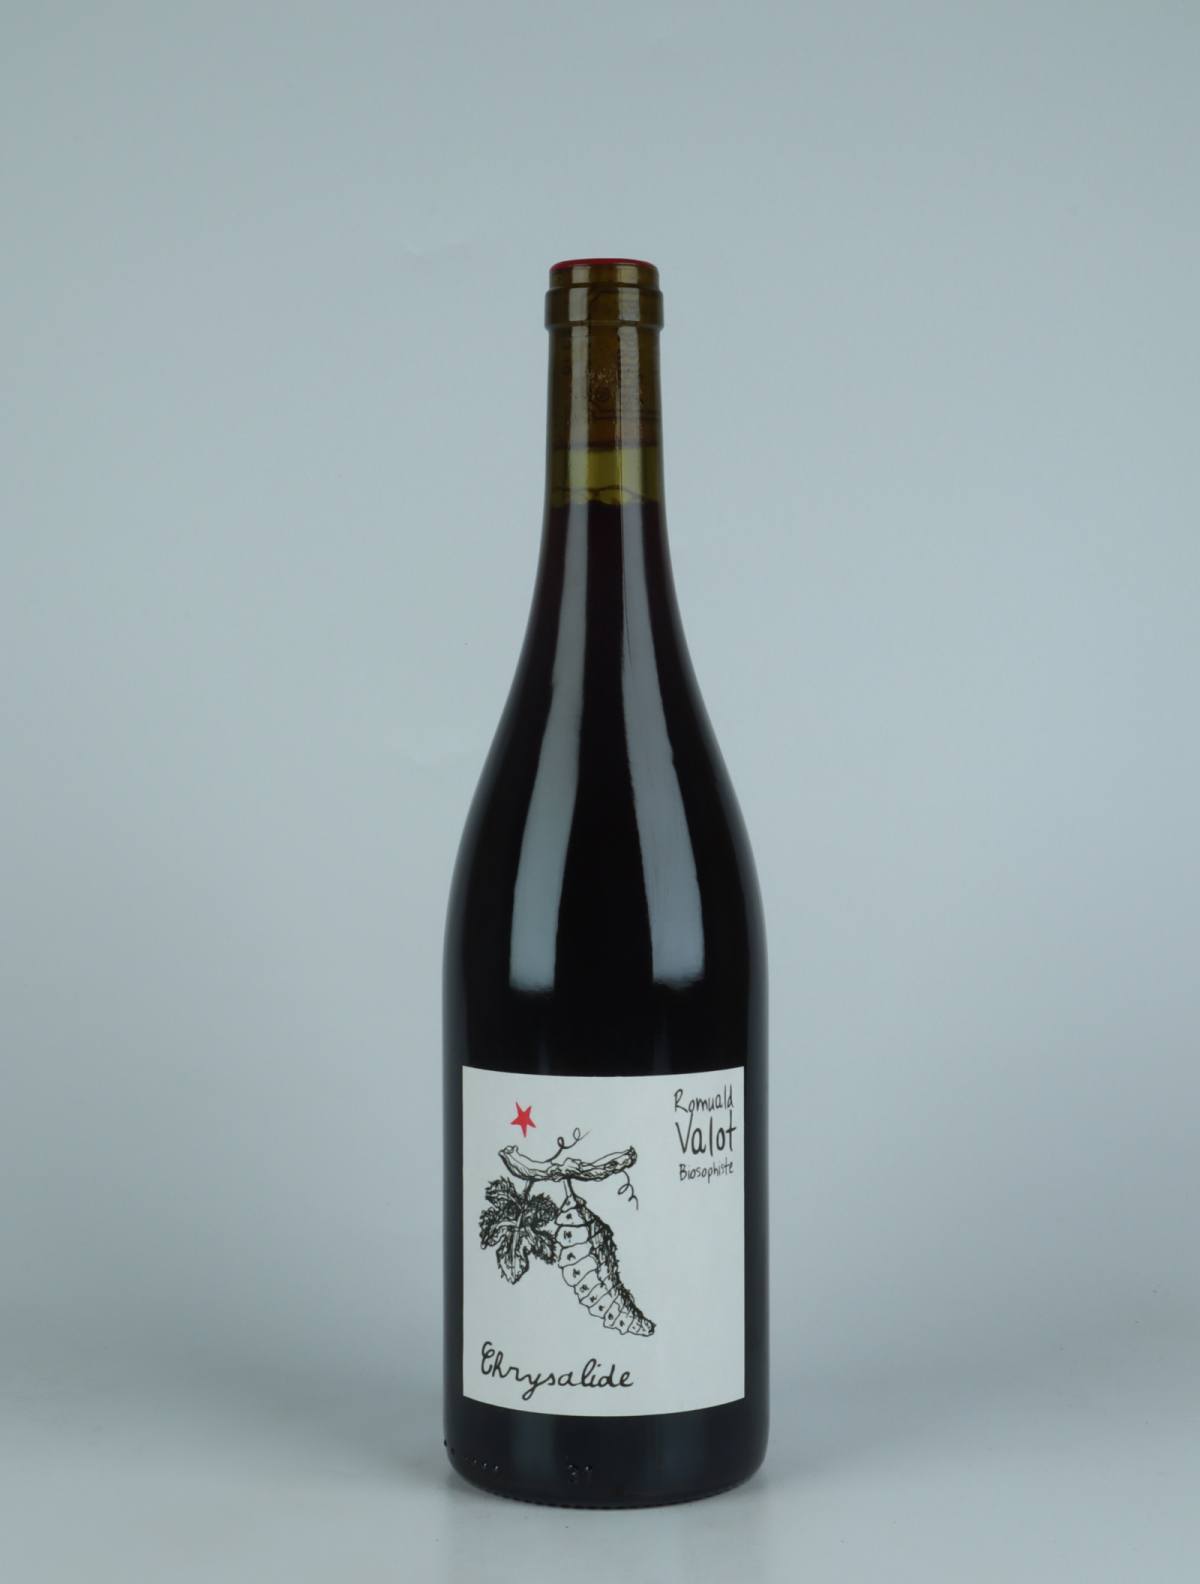 A bottle 2023 Chrysalide Red wine from Romuald Valot, Beaujolais in France